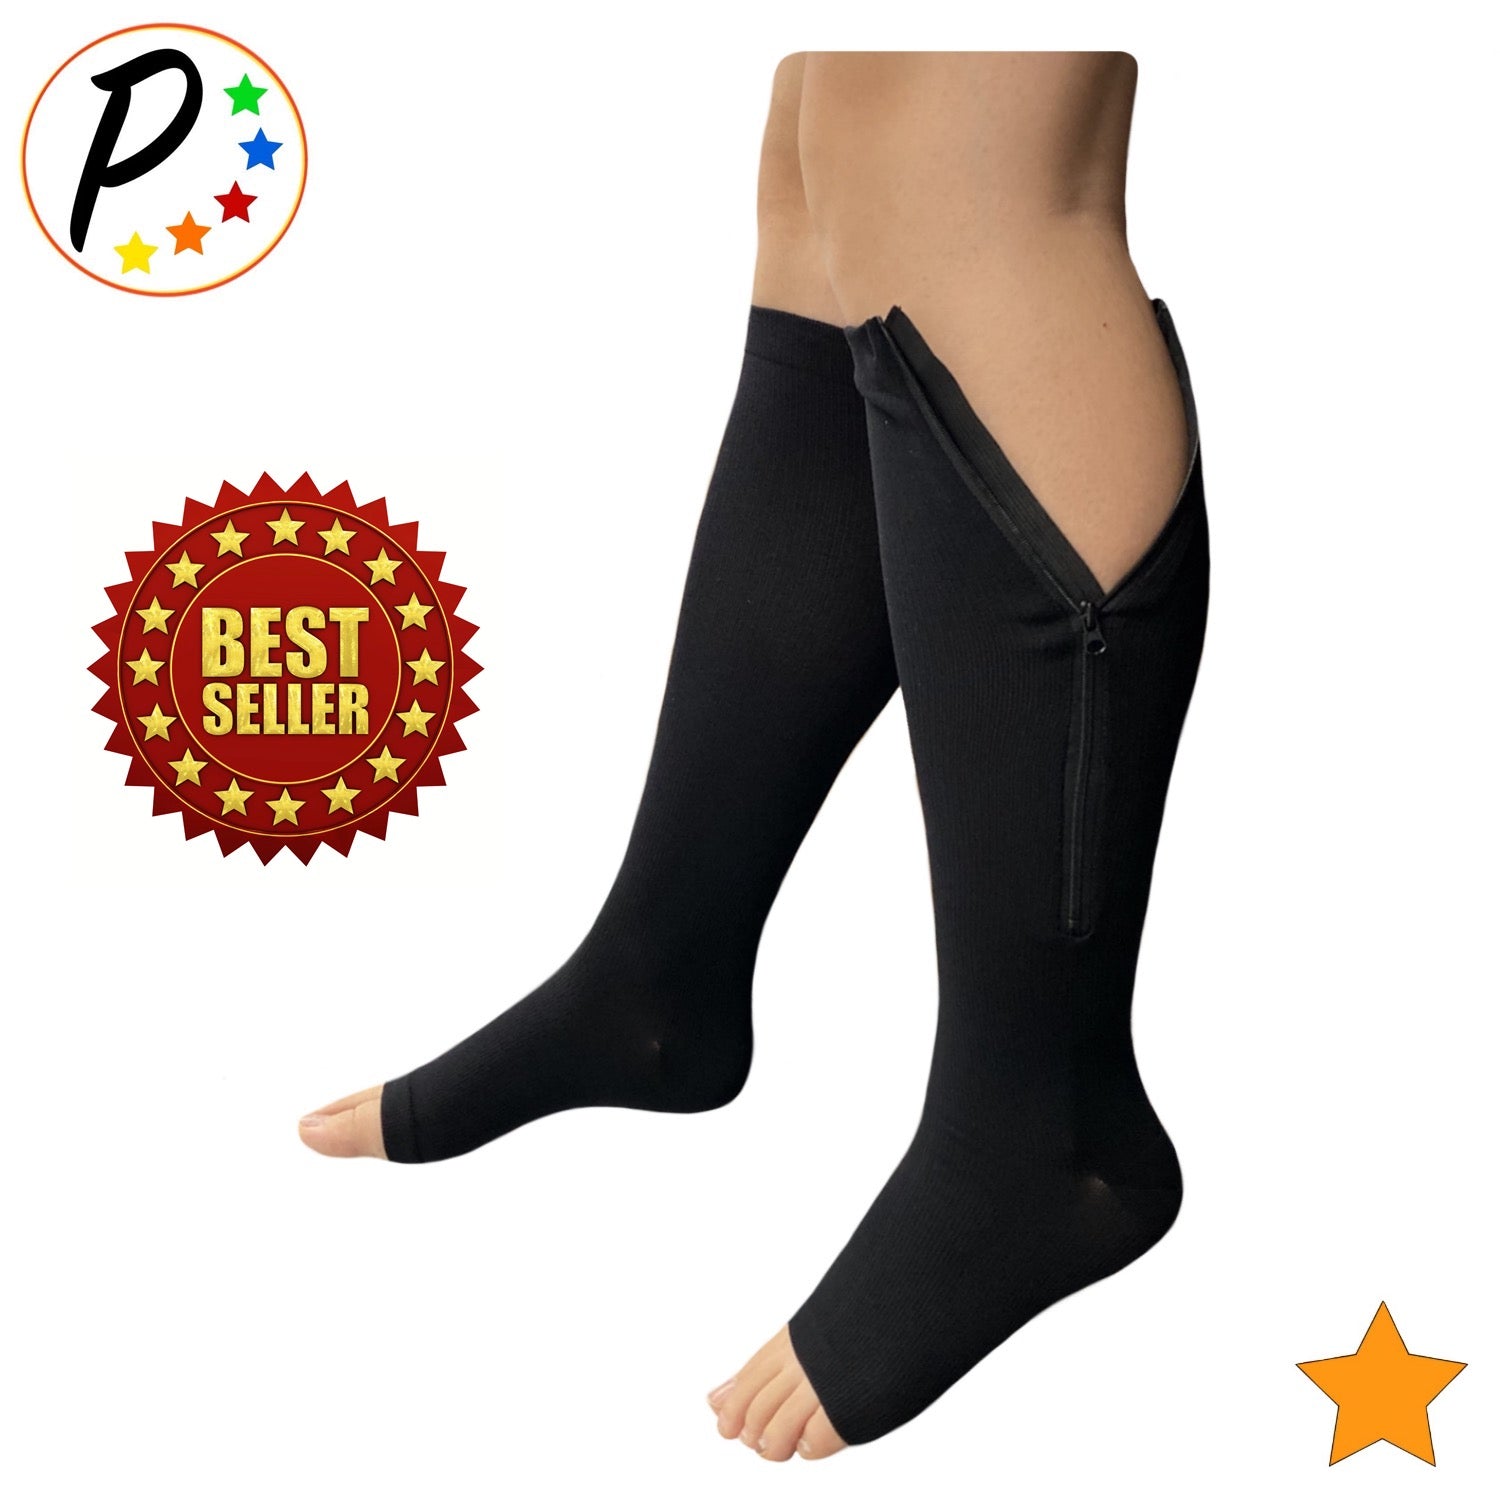 Zipper Socks Compression Socks 2 pairs with Open Toe India